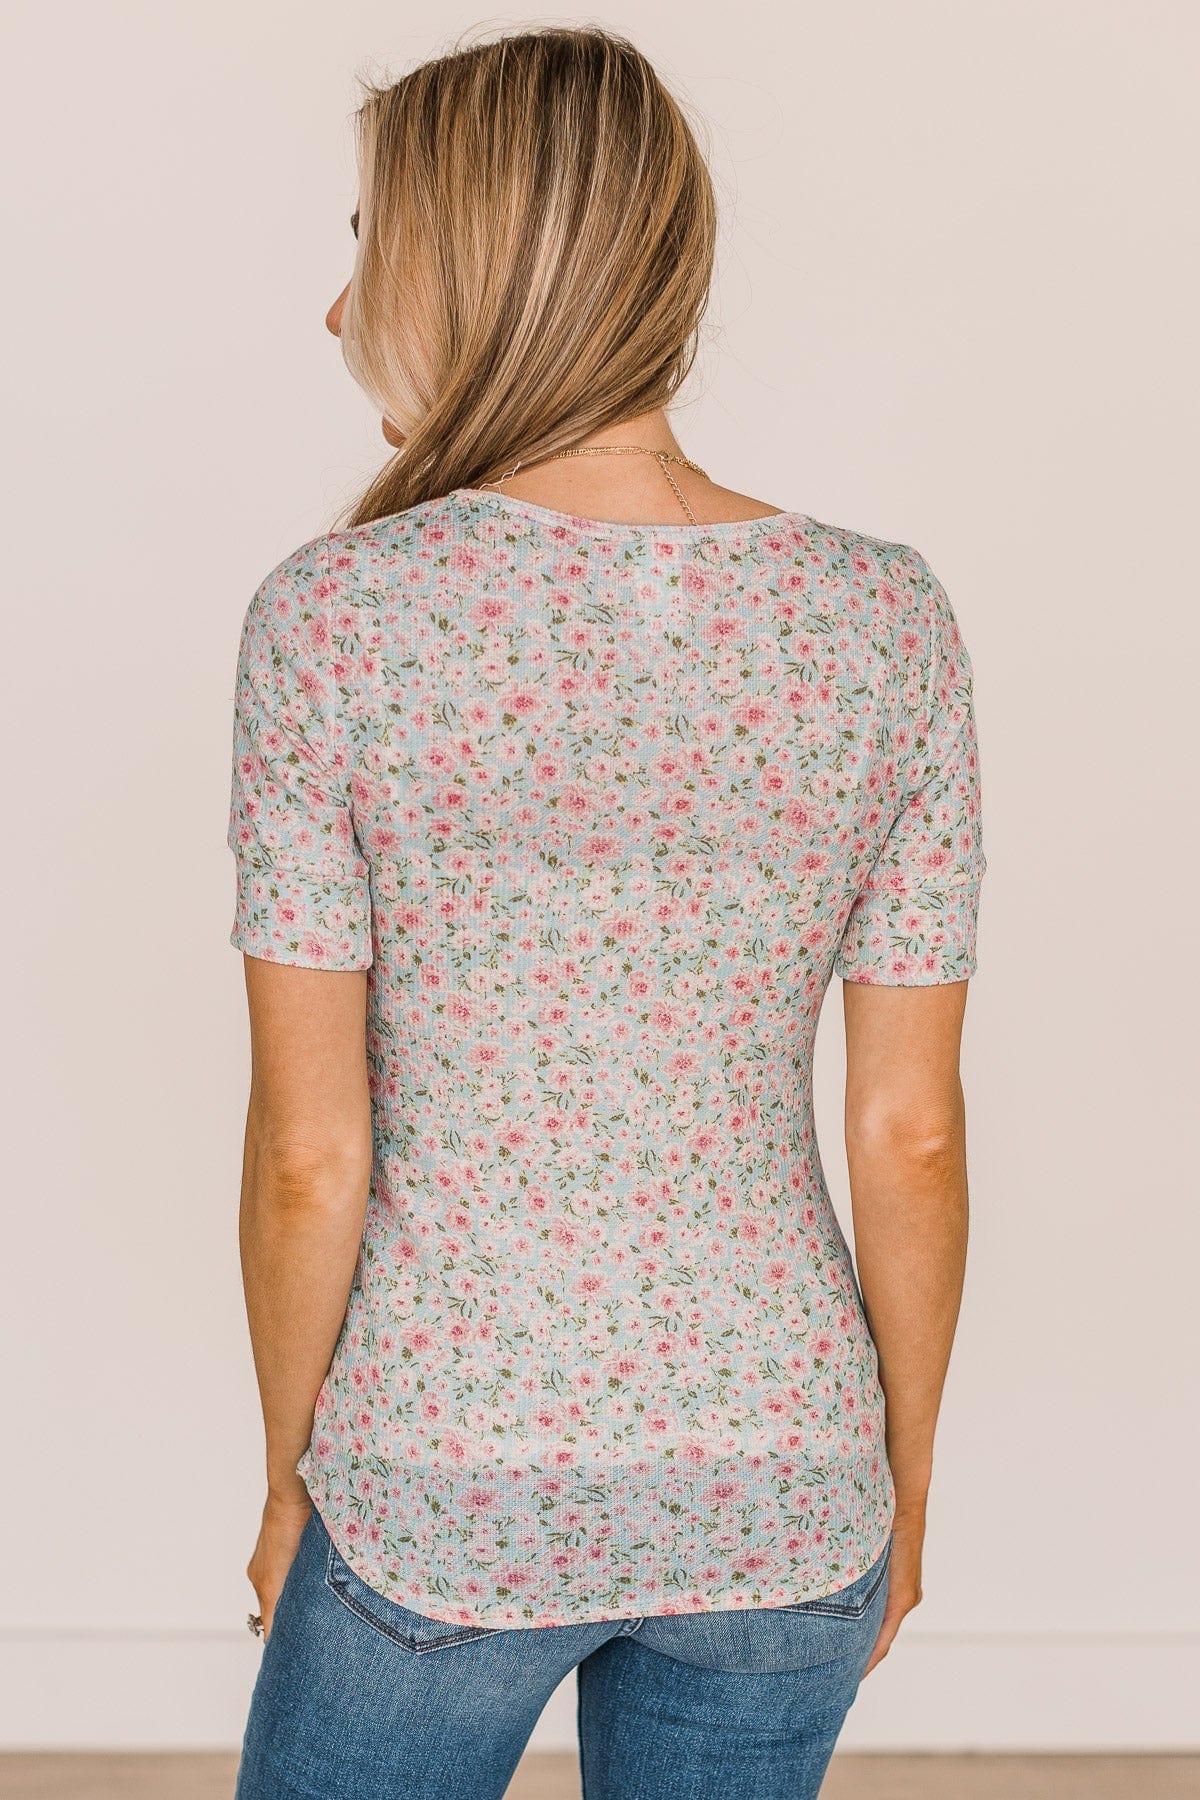 Dream On Floral Button Top- Mint Blue & Pink